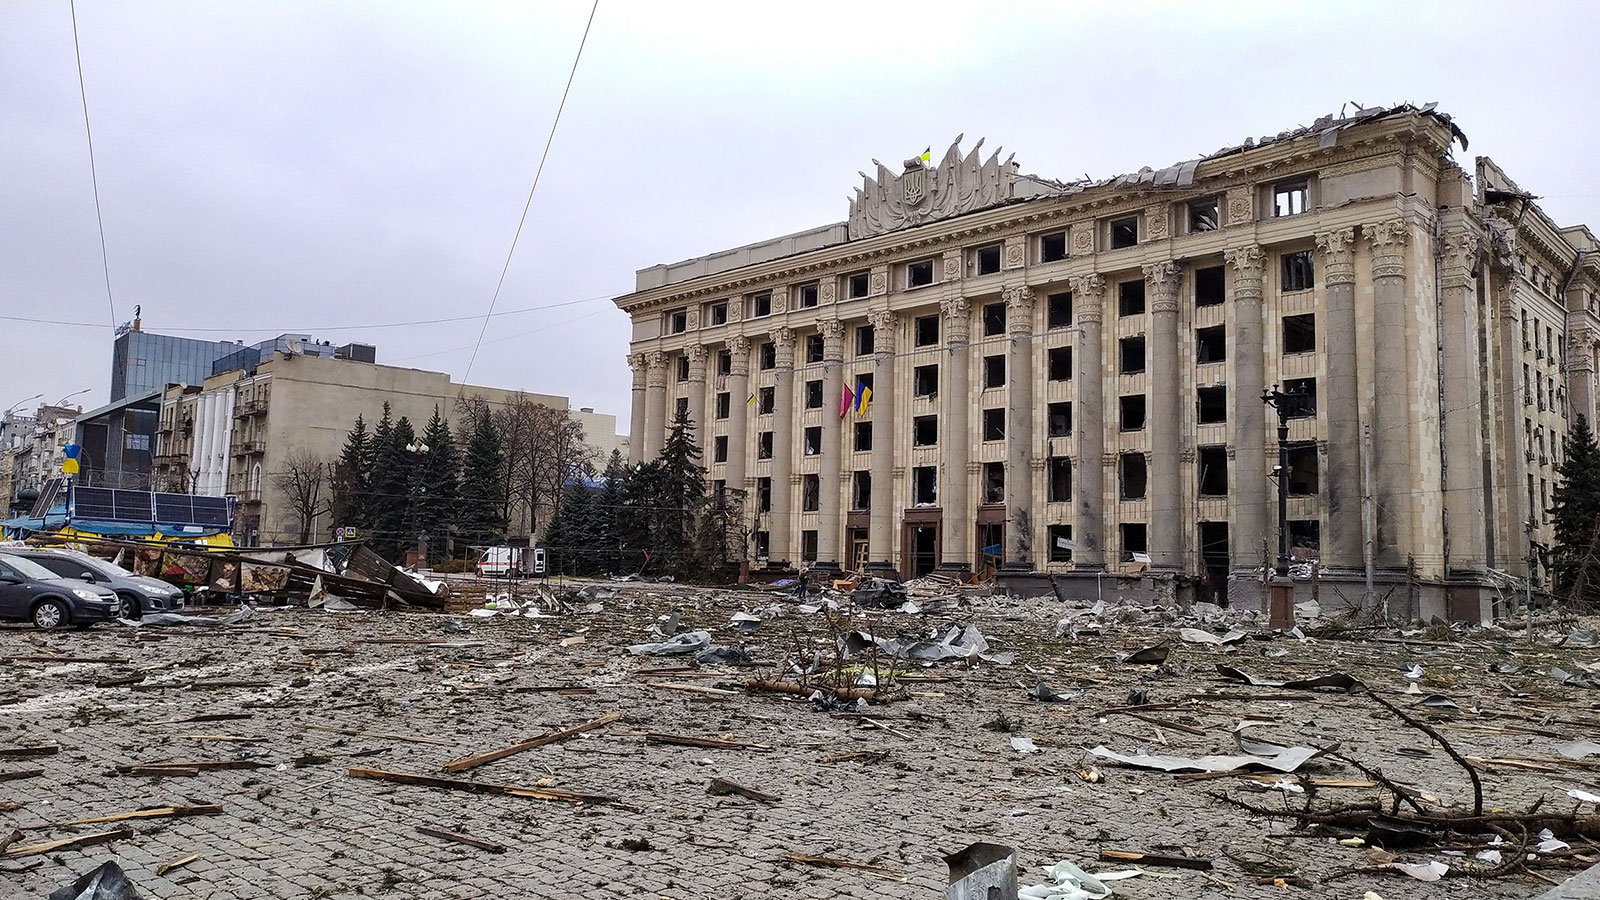 Damage is seen in Kharkiv after rocket strikes by Russian forces on March 1.